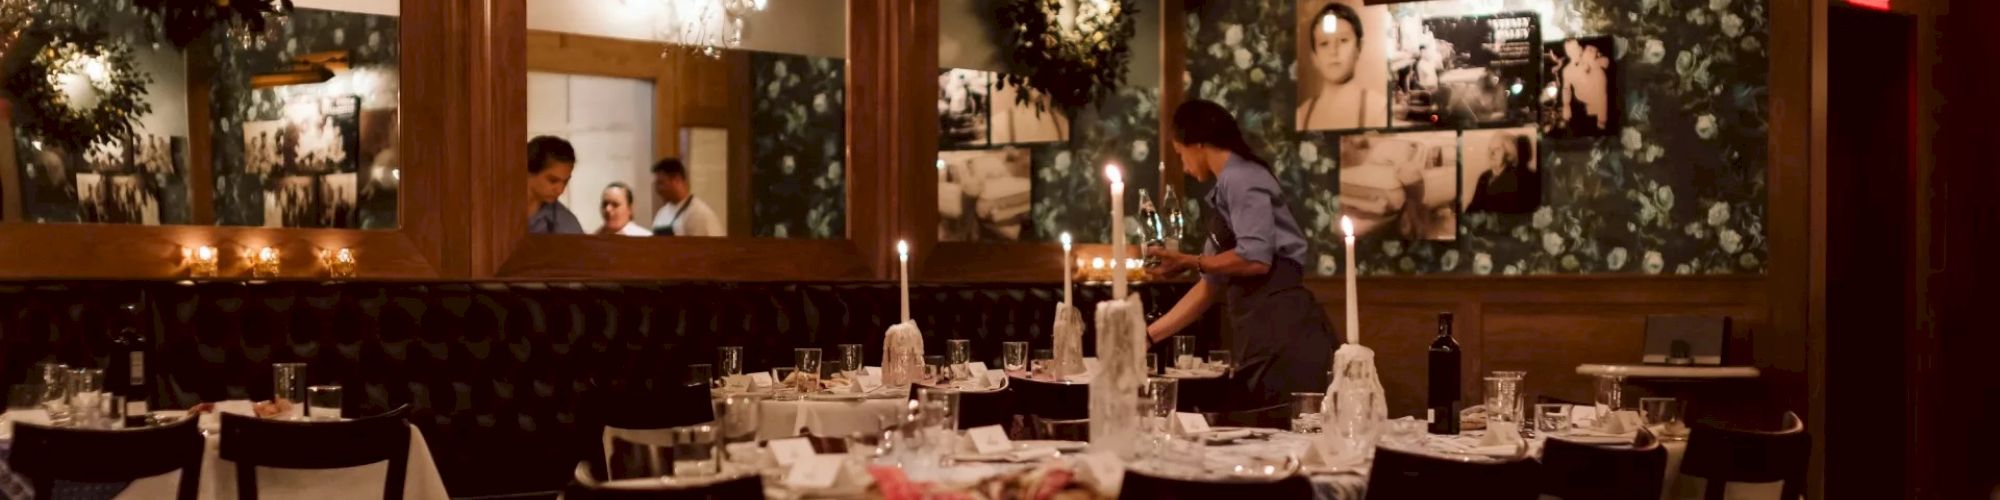 A dimly lit, elegant restaurant with chandeliers, prepared tables, floral wallpaper, and a server arranging items, setting a warm ambiance.